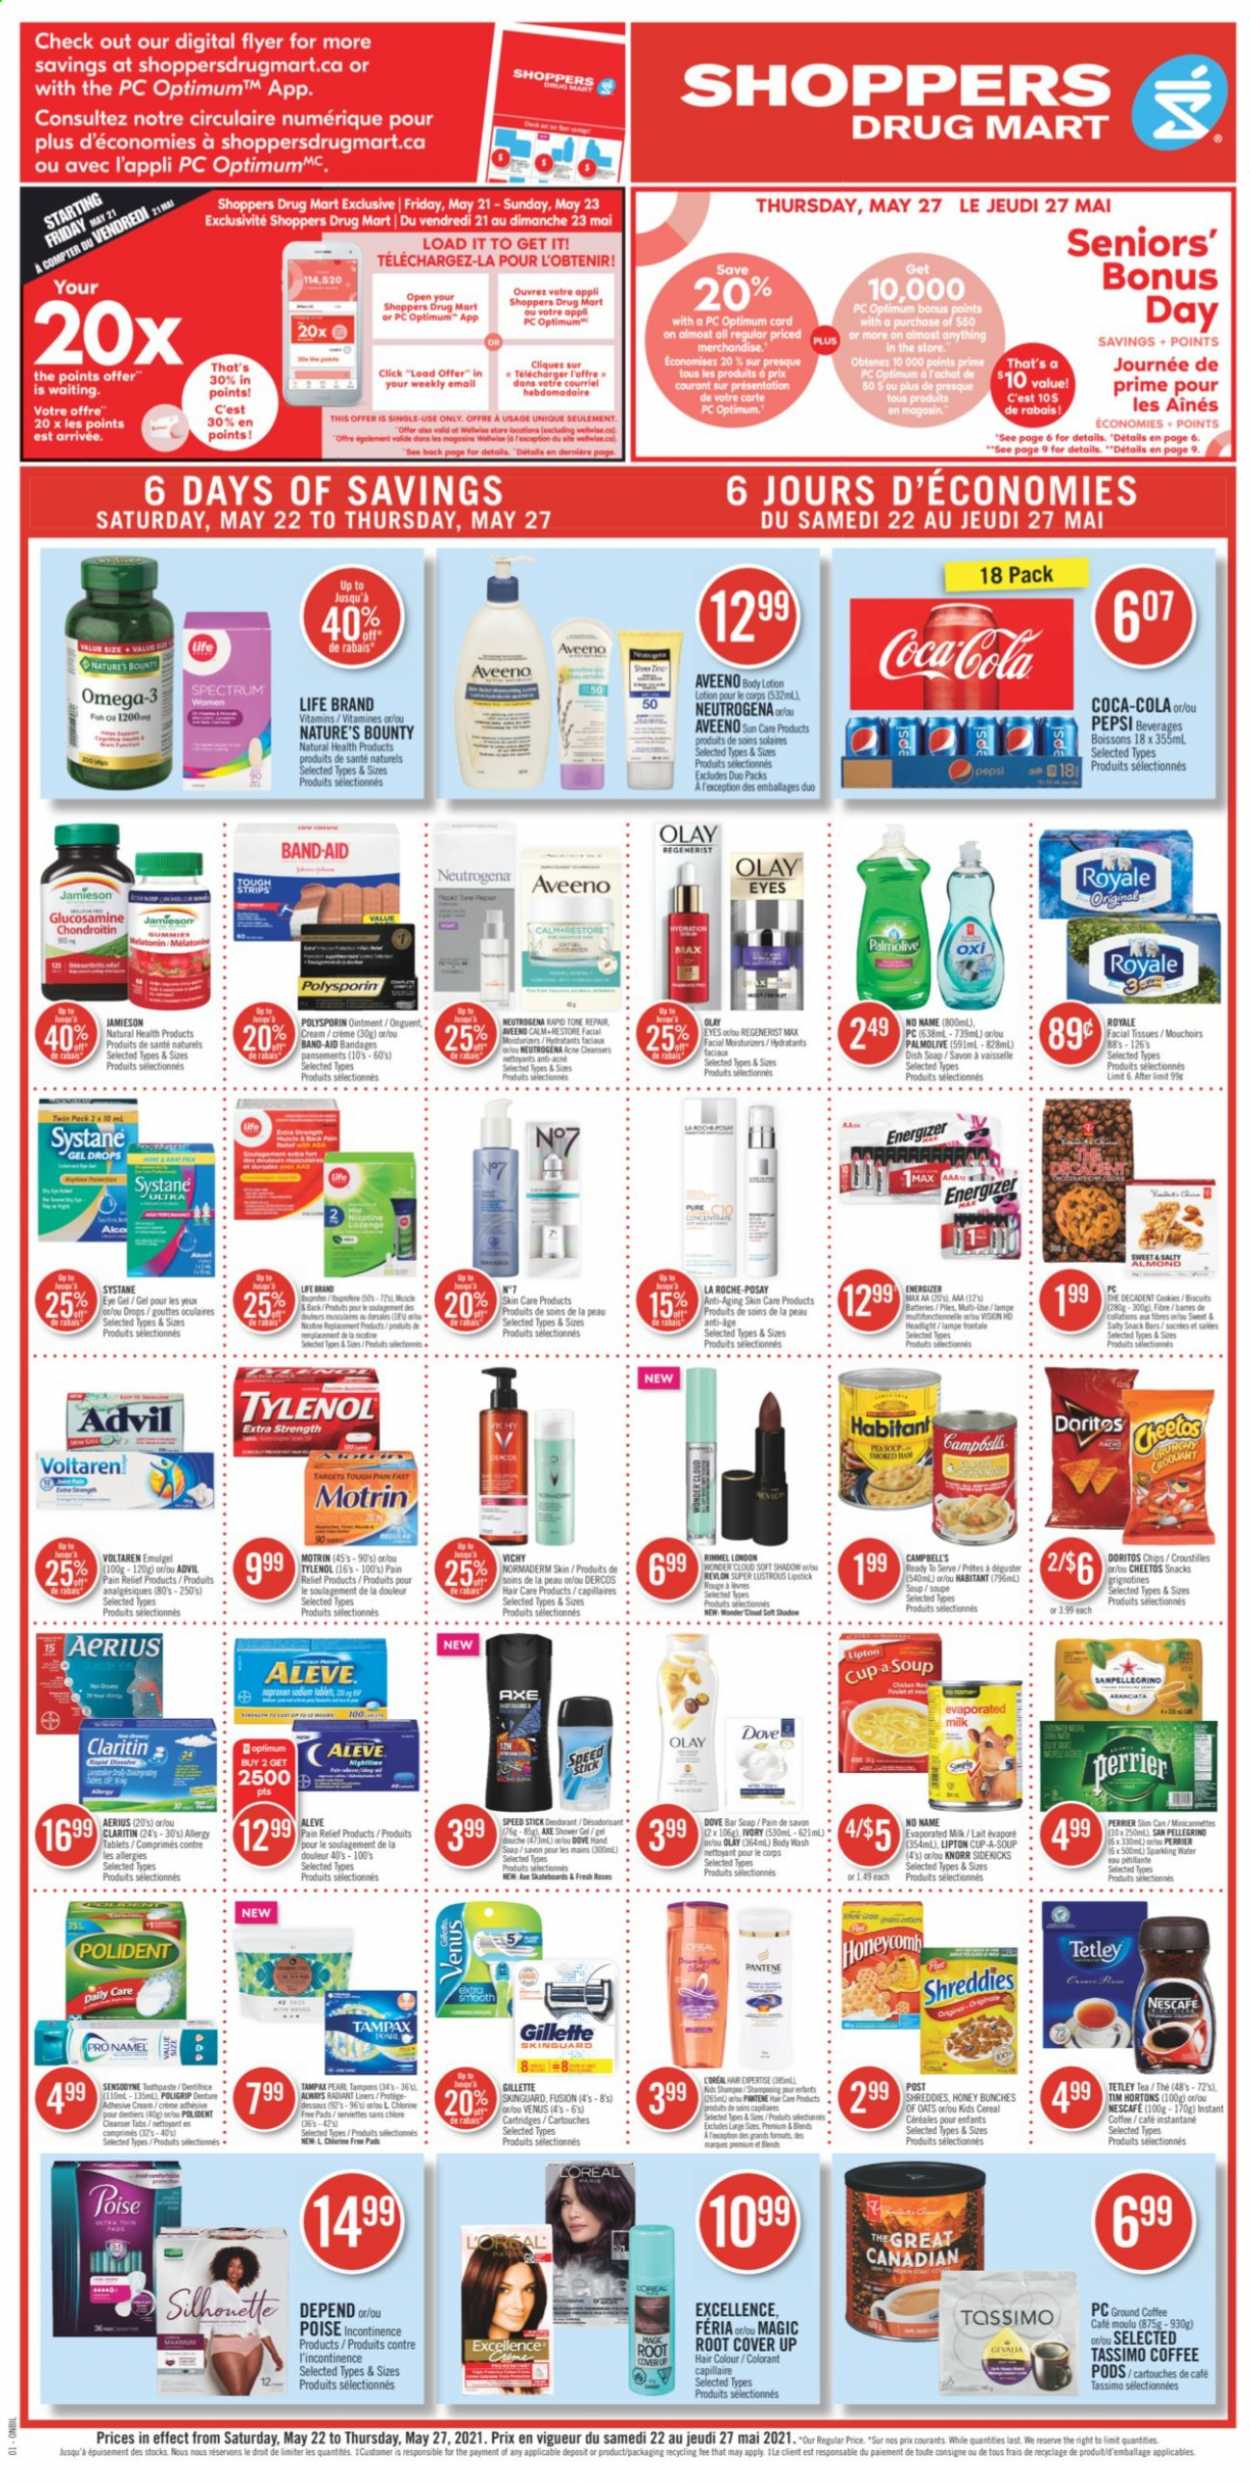 thumbnail - Shoppers Drug Mart Flyer - May 22, 2021 - May 27, 2021 - Sales products - snack, Doritos, Cheetos, soup, cereals, Campbell's, Coca-Cola, Pepsi, Perrier, sparkling water, San Pellegrino, tea, coffee pods, instant coffee, ground coffee, Aveeno, ointment, tissues, body wash, shower gel, Vichy, hand soap, Palmolive, soap bar, soap, Polident, tampons, cleanser, eye gel, facial tissues, L’Oréal, La Roche-Posay, Olay, Revlon, hair color, body lotion, anti-perspirant, Speed Stick, Venus, lipstick, Rimmel, pain relief, Aleve, glucosamine, Melatonin, Nature's Bounty, Tylenol, Omega-3, Advil Rapid, Spectrum, Motrin, Knorr, Gillette, Neutrogena, Systane, Tampax, Pantene, chips, Sensodyne, Nescafé, deodorant. Page 1.